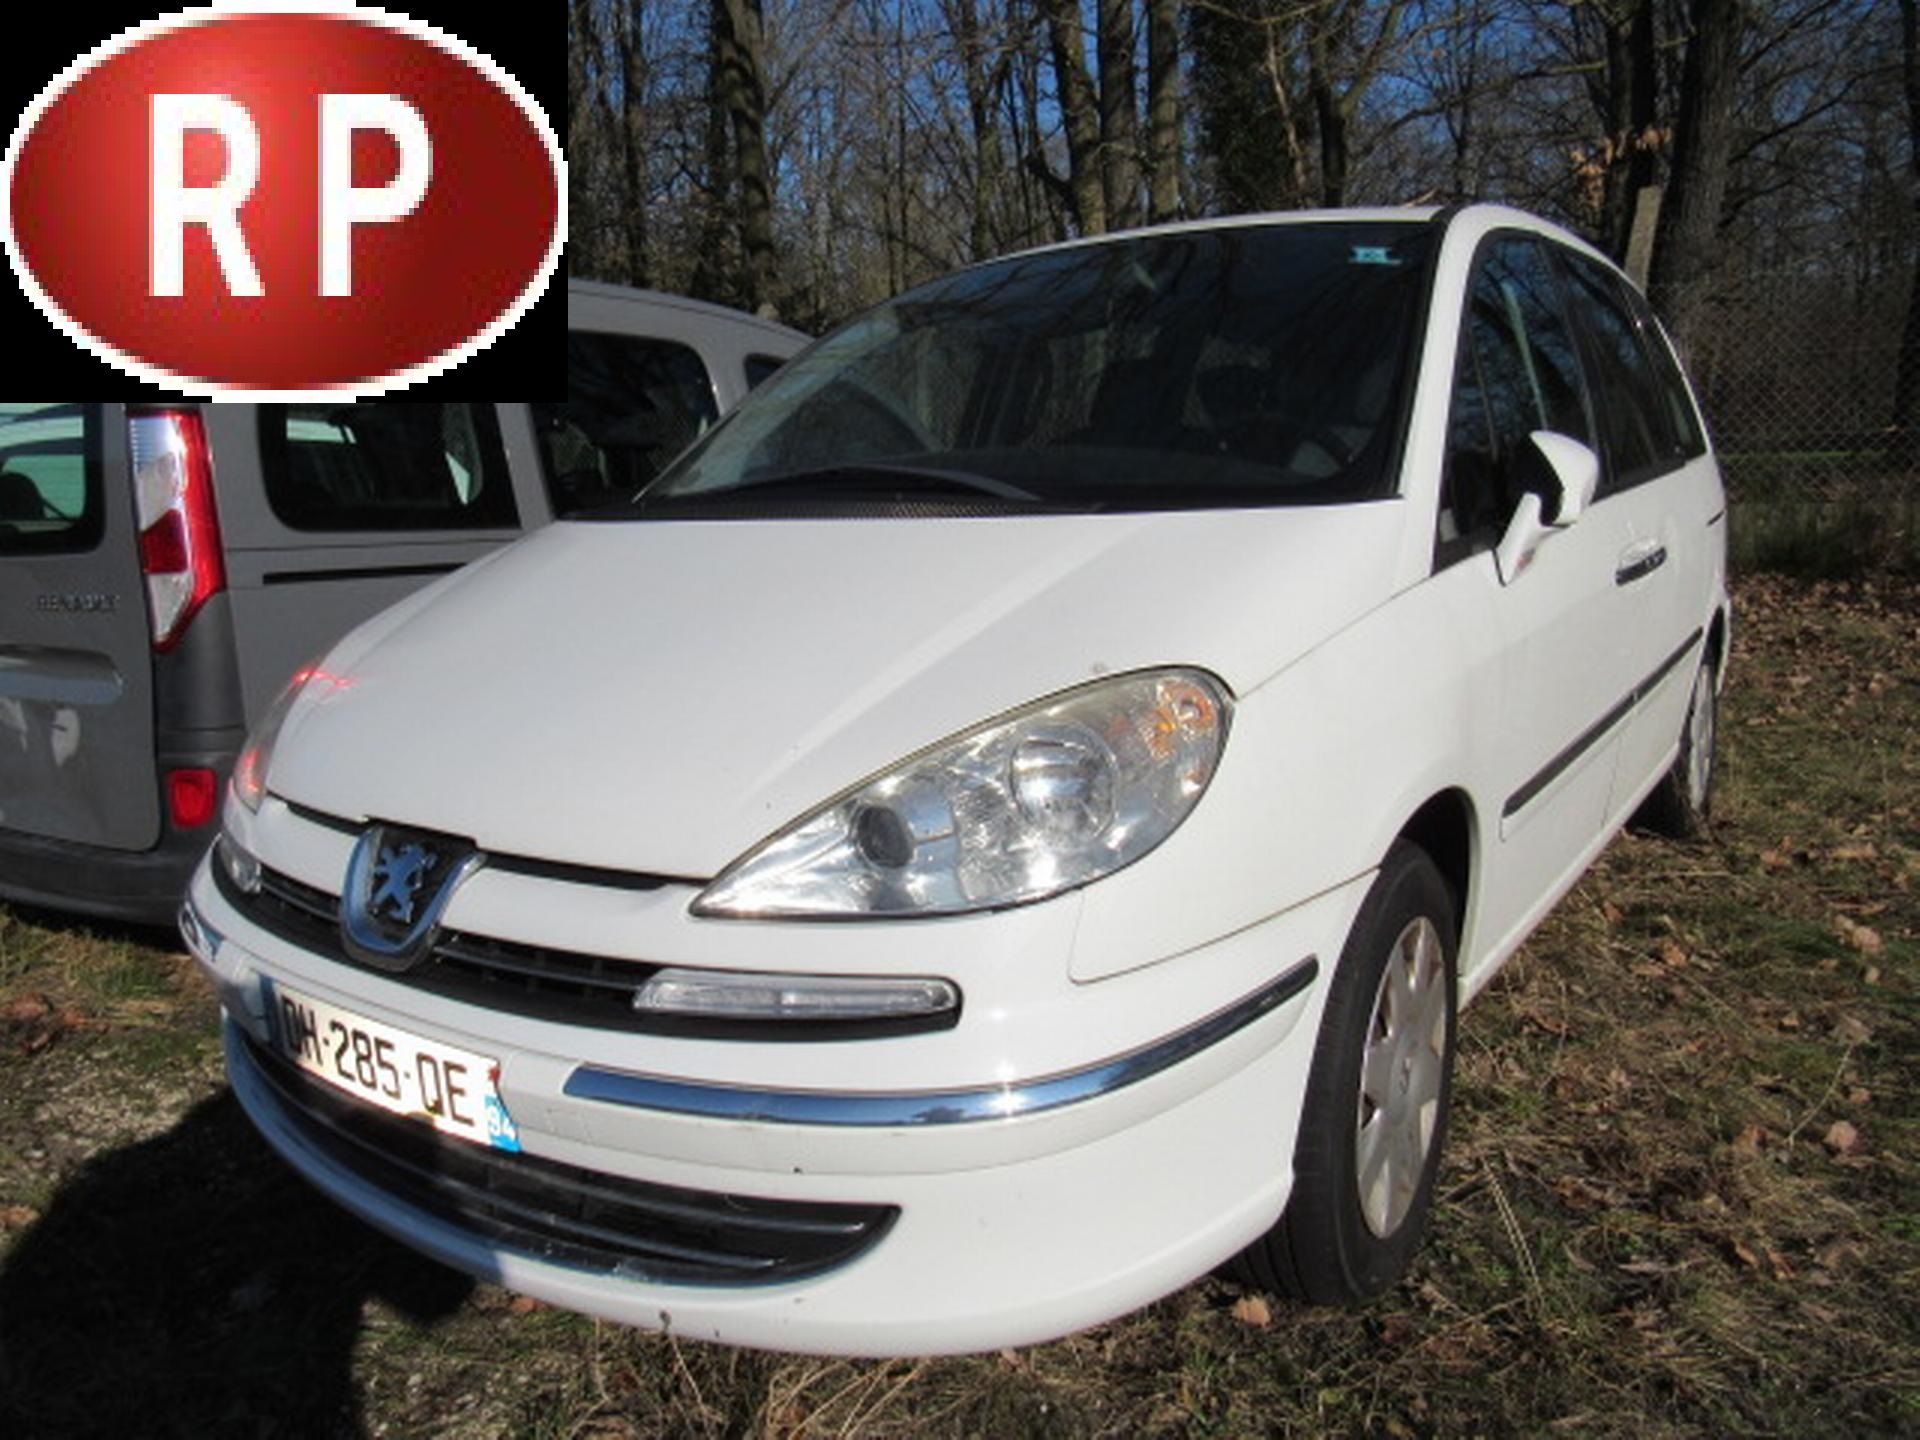 Null [RP] PEUGEOT 807 2.0 HDi 120, Diesel, imm. DH-285-QE, type MPE5416NM303, se&hellip;